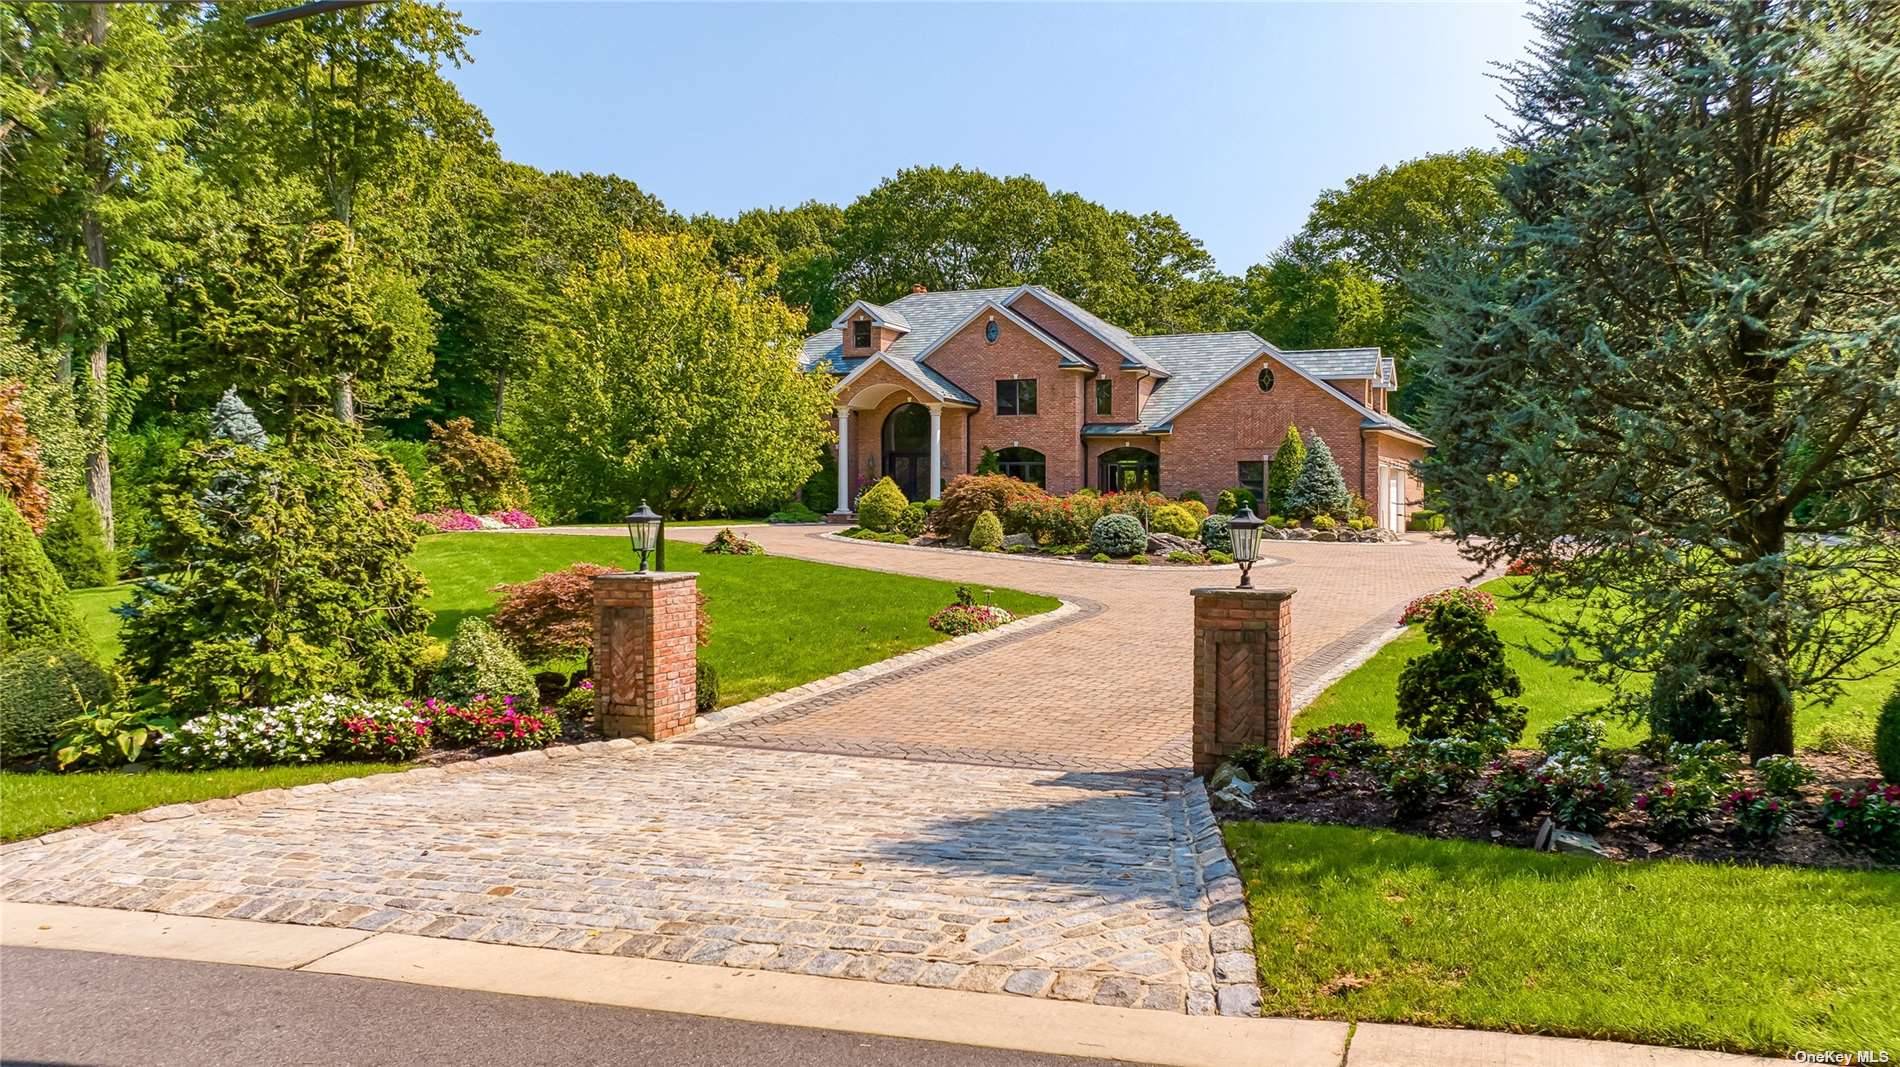 Grand 7091 square foot colonial set on 2 bucolic acres with inground heated salt water pool, waterfall and granite surround.